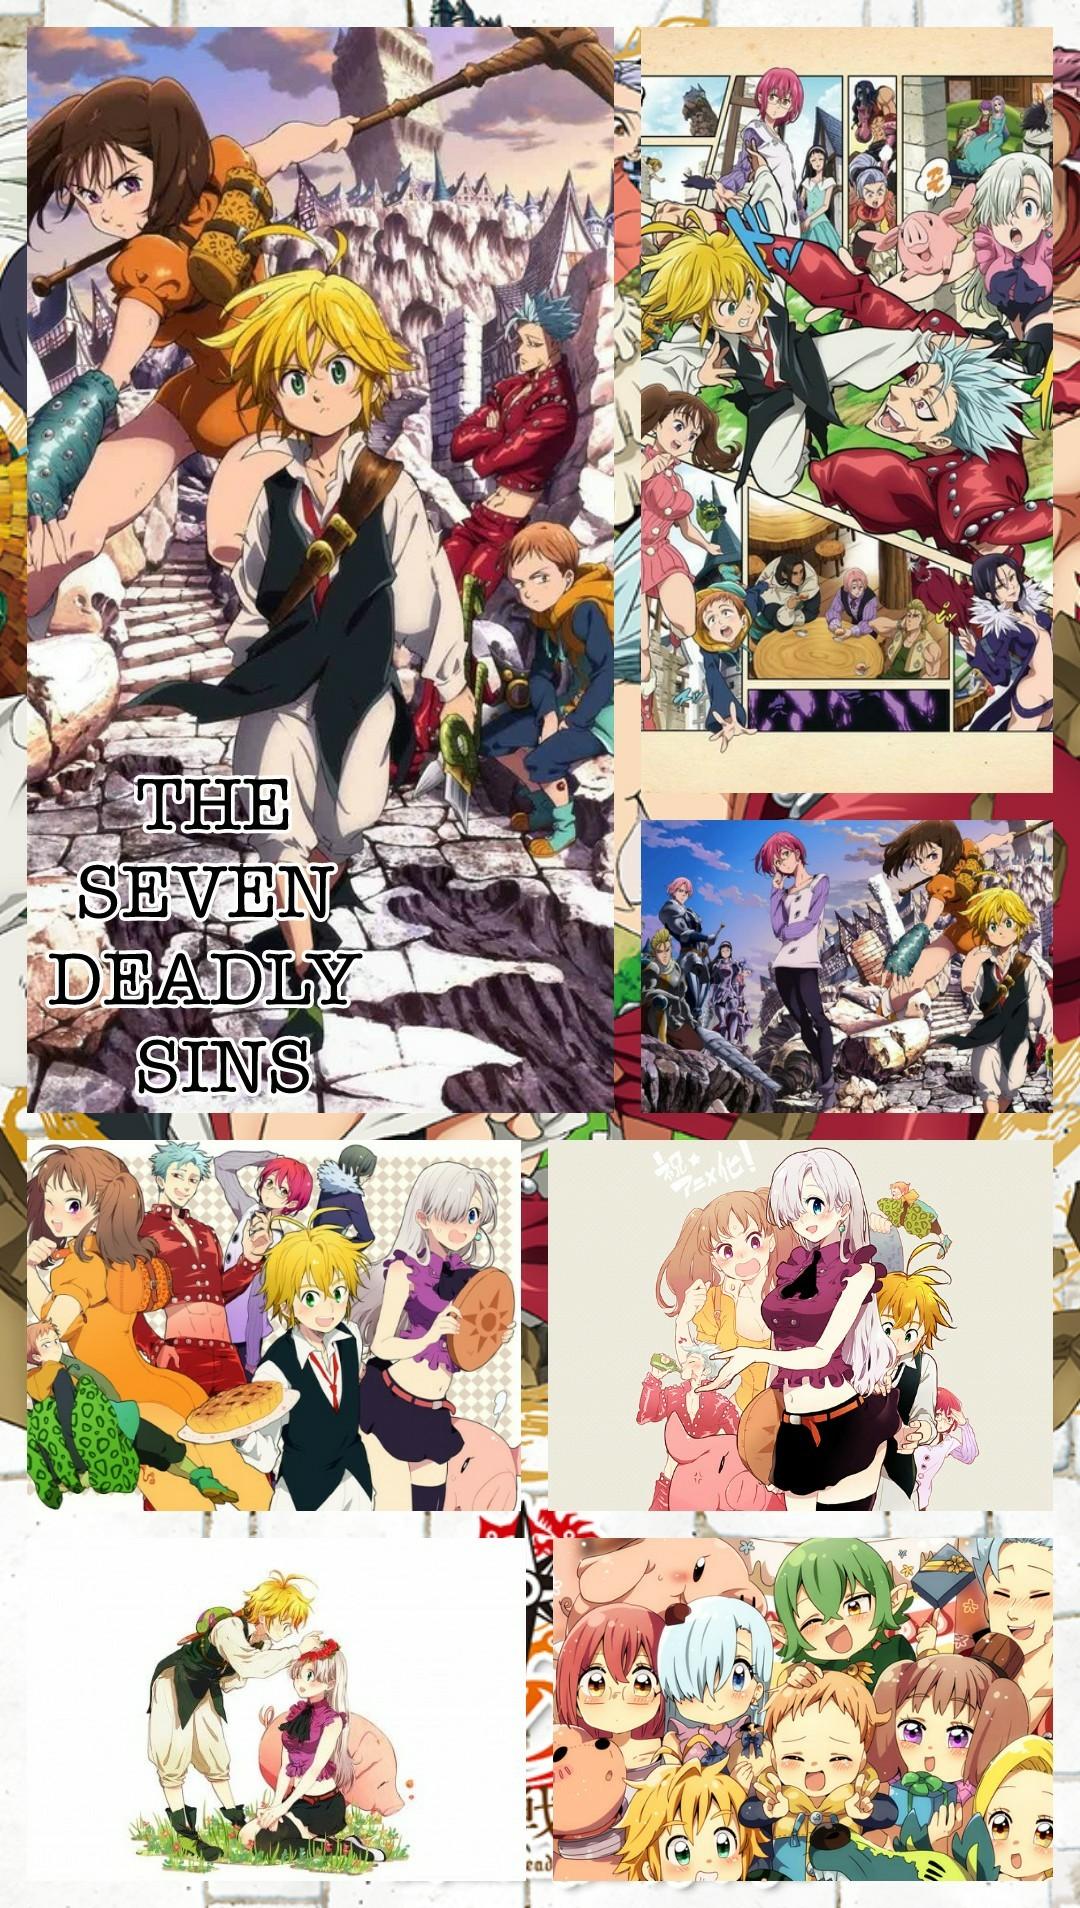  THE
SEVEN
DEADLY
  SINS